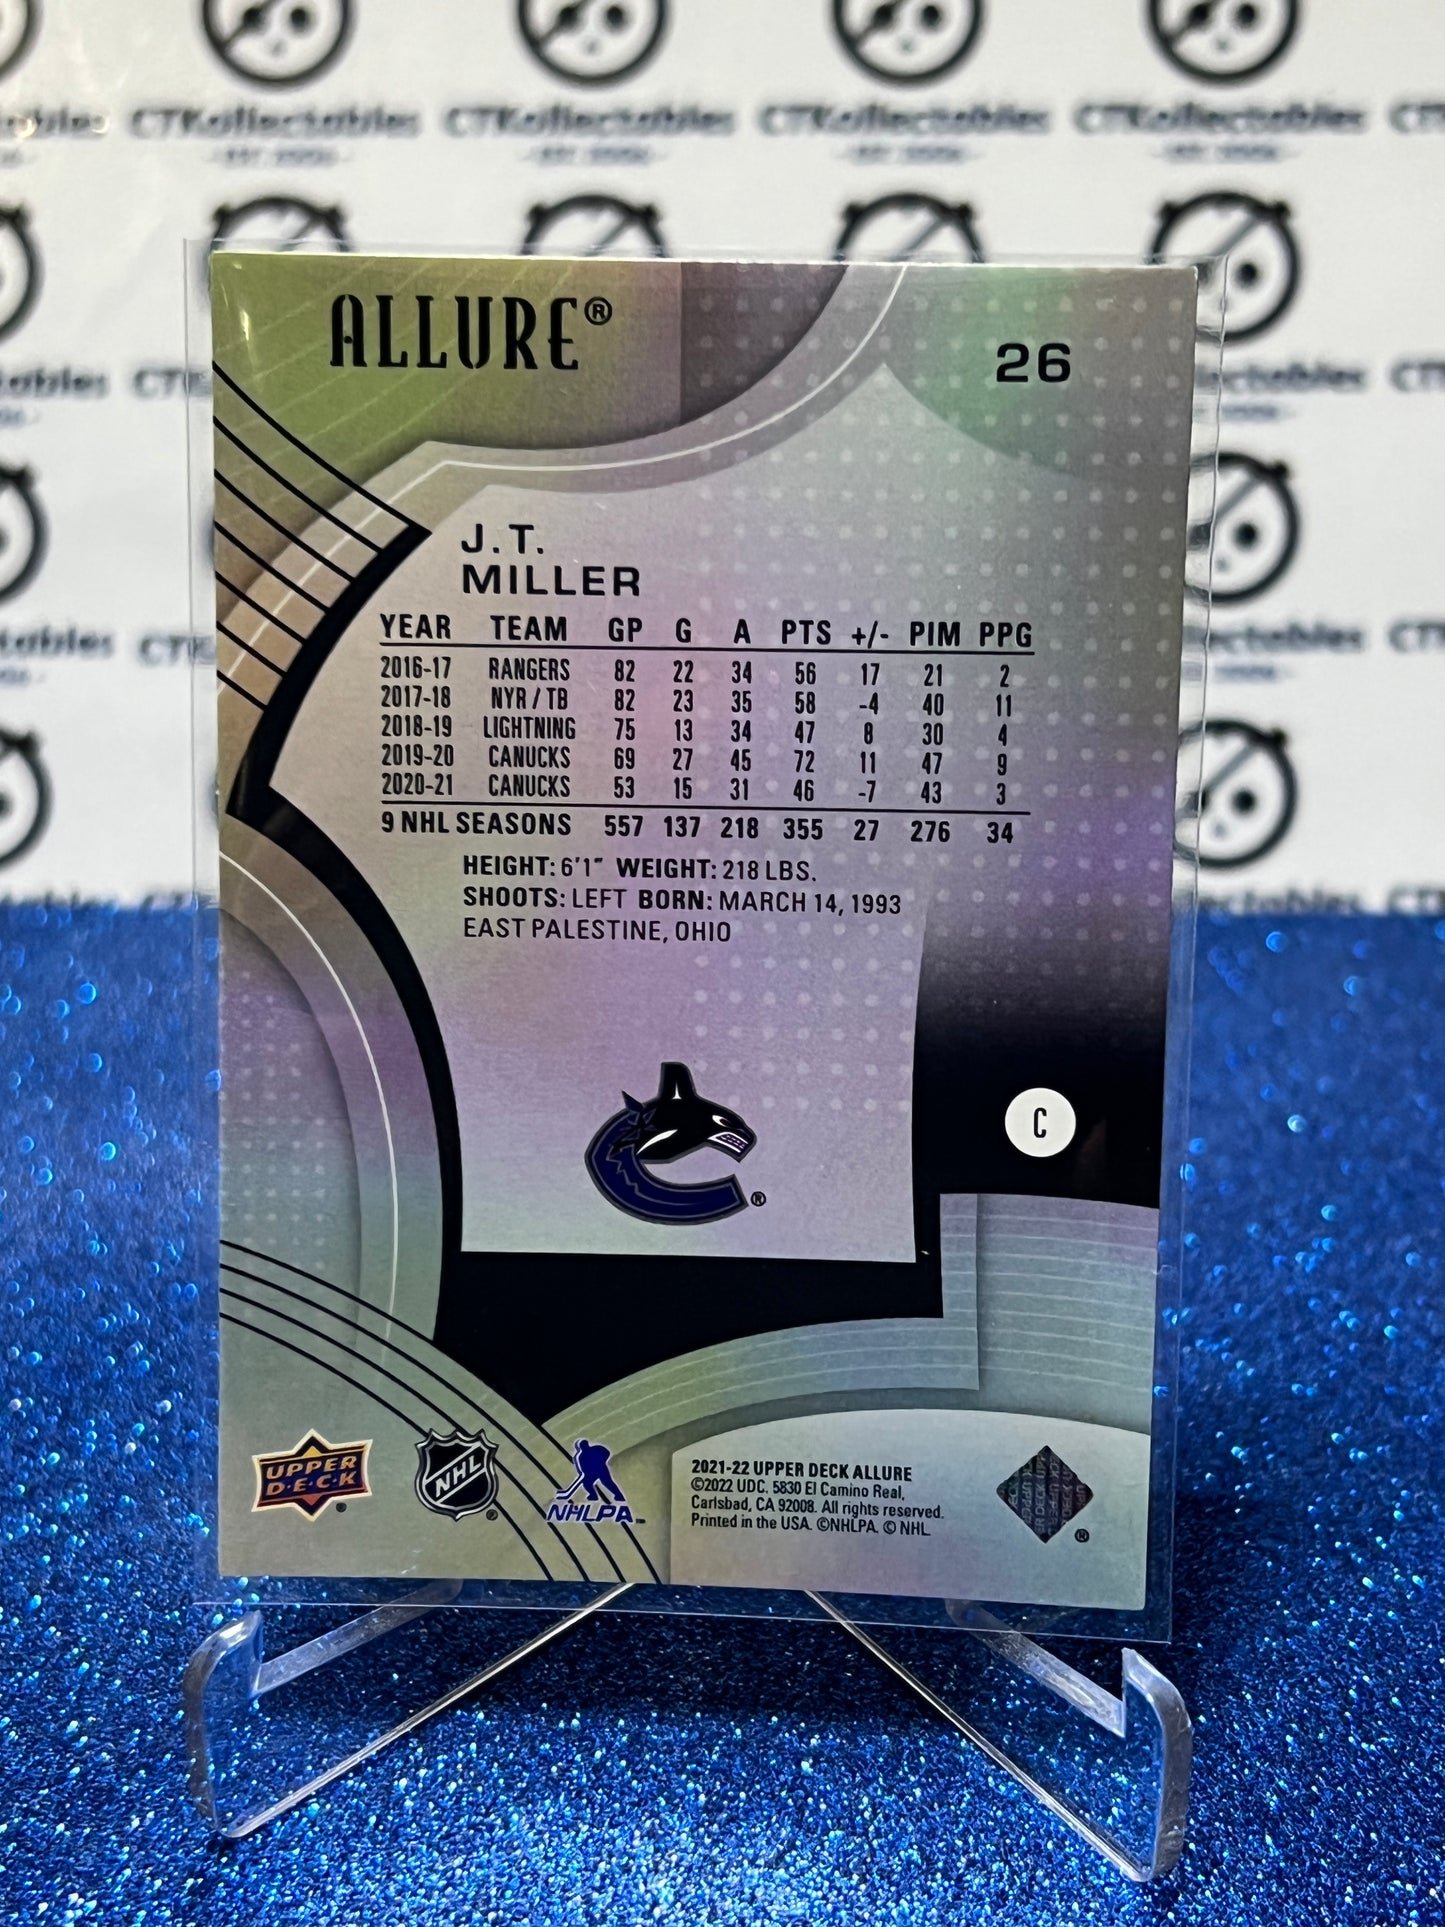 2021-22 UPPER DECK ALLURE L.T. MILLER # 26 RED RAINBOW AUTO VANCOUVER CANUCKS NHL HOCKEY CARD